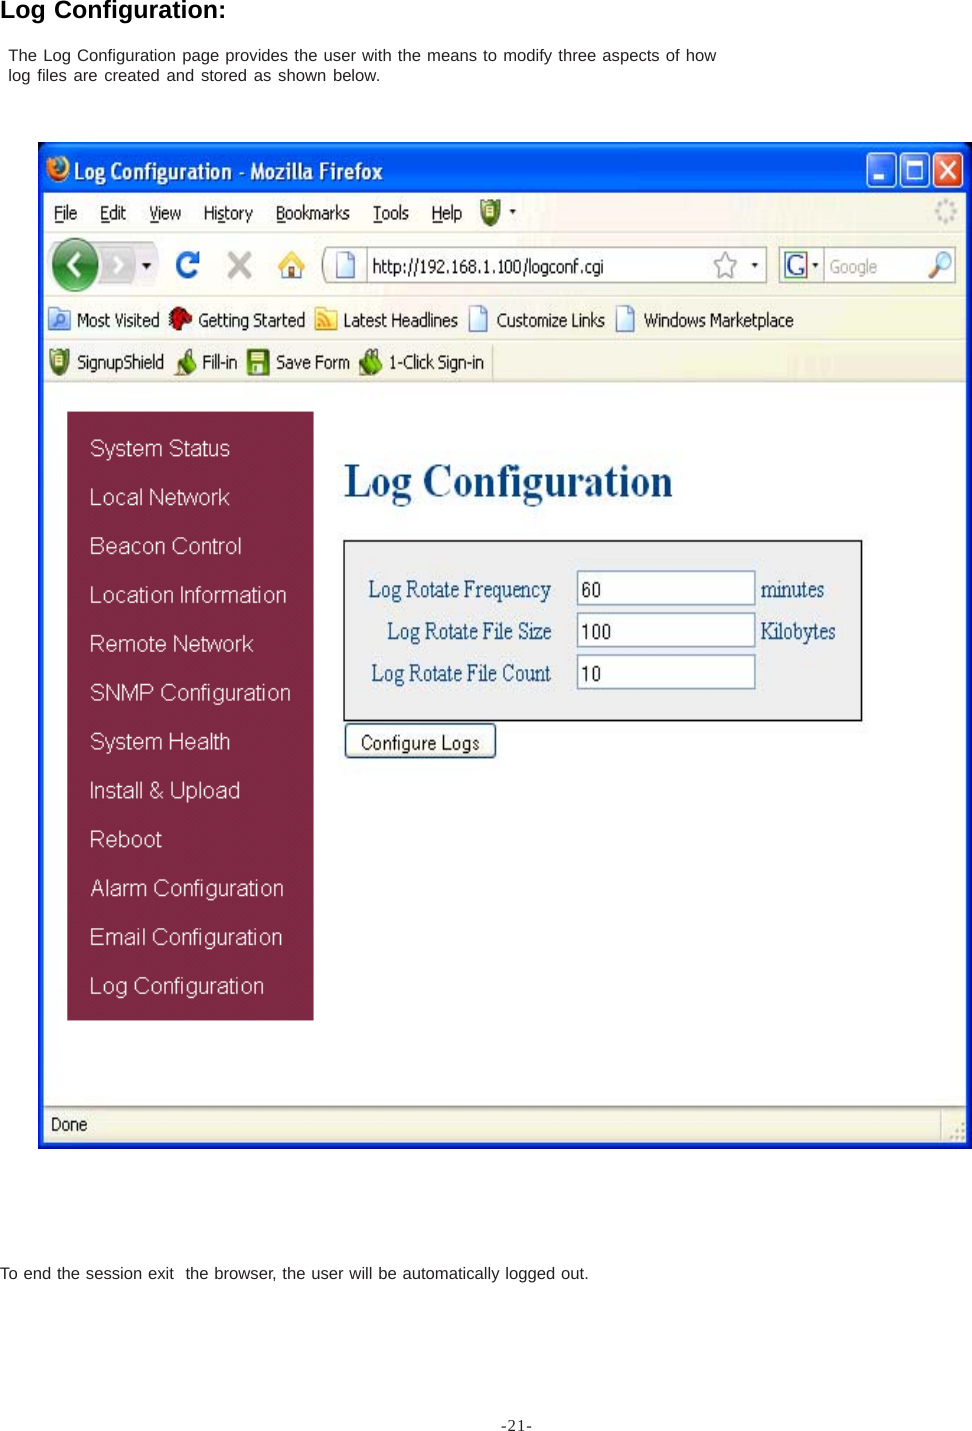 -21-To end the session exit  the browser, the user will be automatically logged out.The Log Configuration page provides the user with the means to modify three aspects of howlog files are created and stored as shown below.Log Configuration: